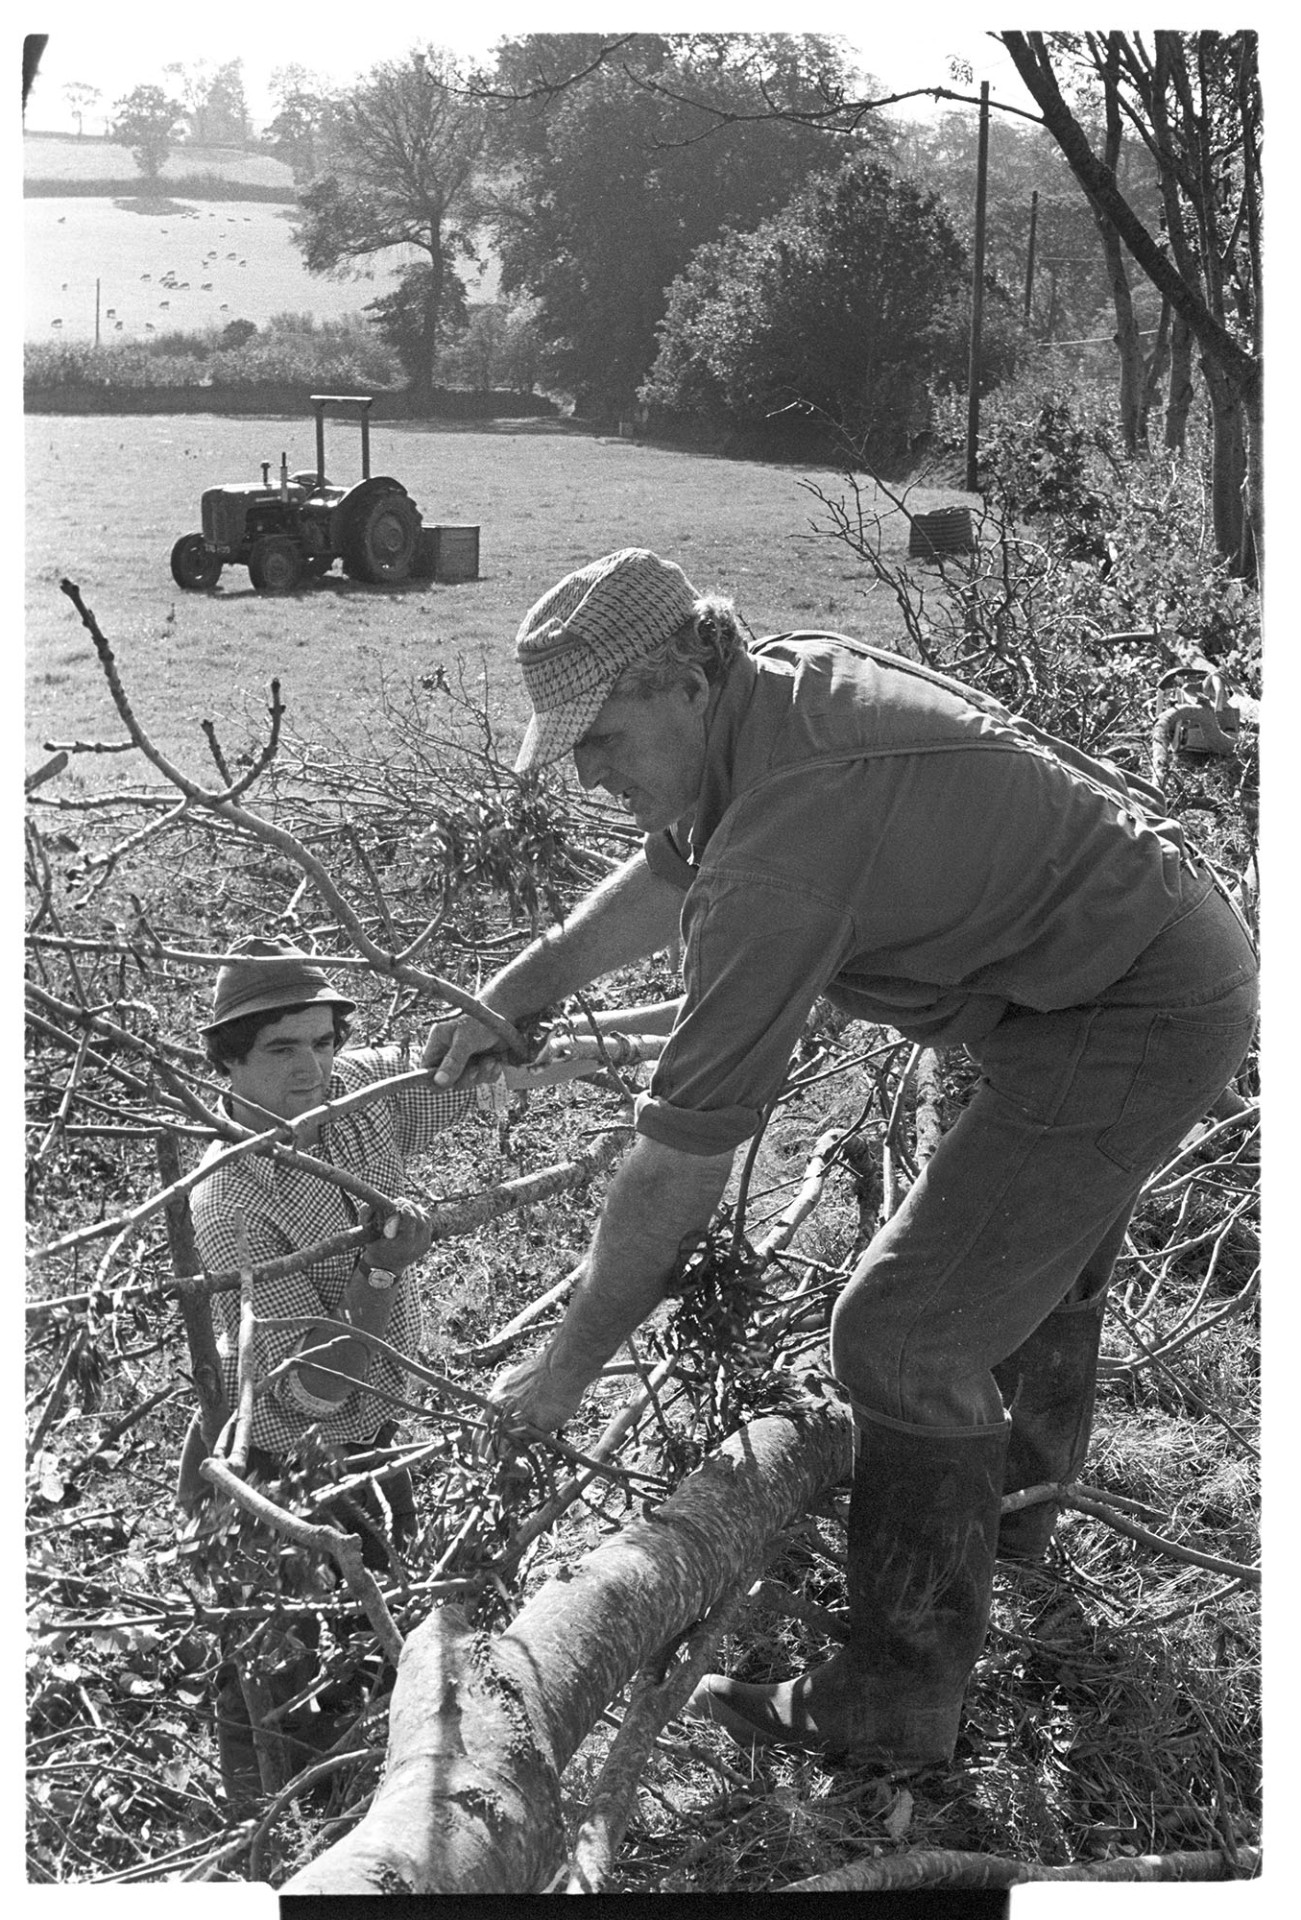 Farmers laying hedge, using wooden crucks to hold it. 
[Alf Pugsley and Stephen Squire laying a hedge at Lower Langham, Dolton. They are using wooden crucks to hold the hedge in place, Alf Pugsley is stood in the hedge. A tractor and link box are parked in the field by the hedge.]